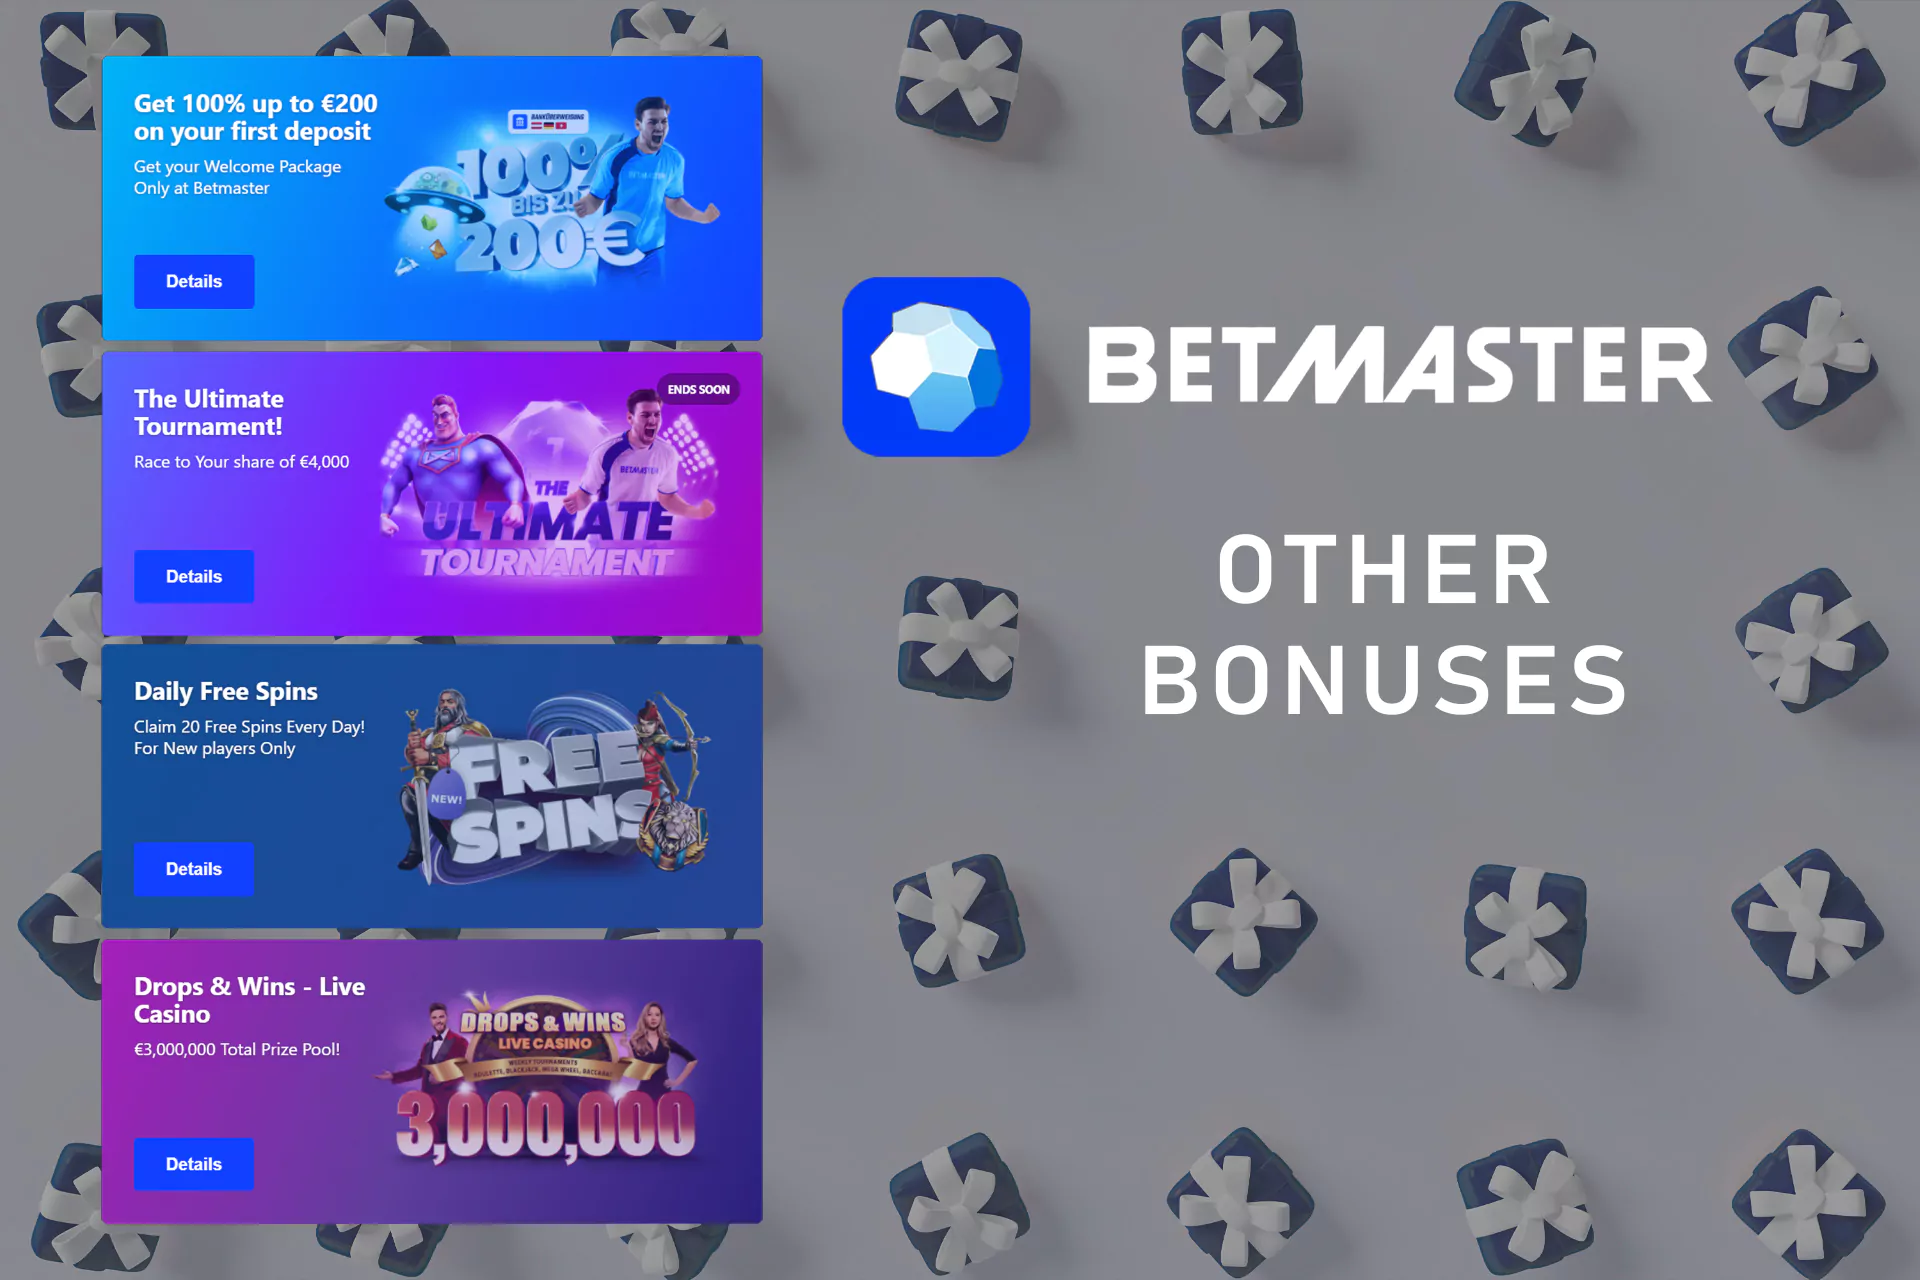 In the section of Promotions on the official site, you can see the list of other bonus programs.